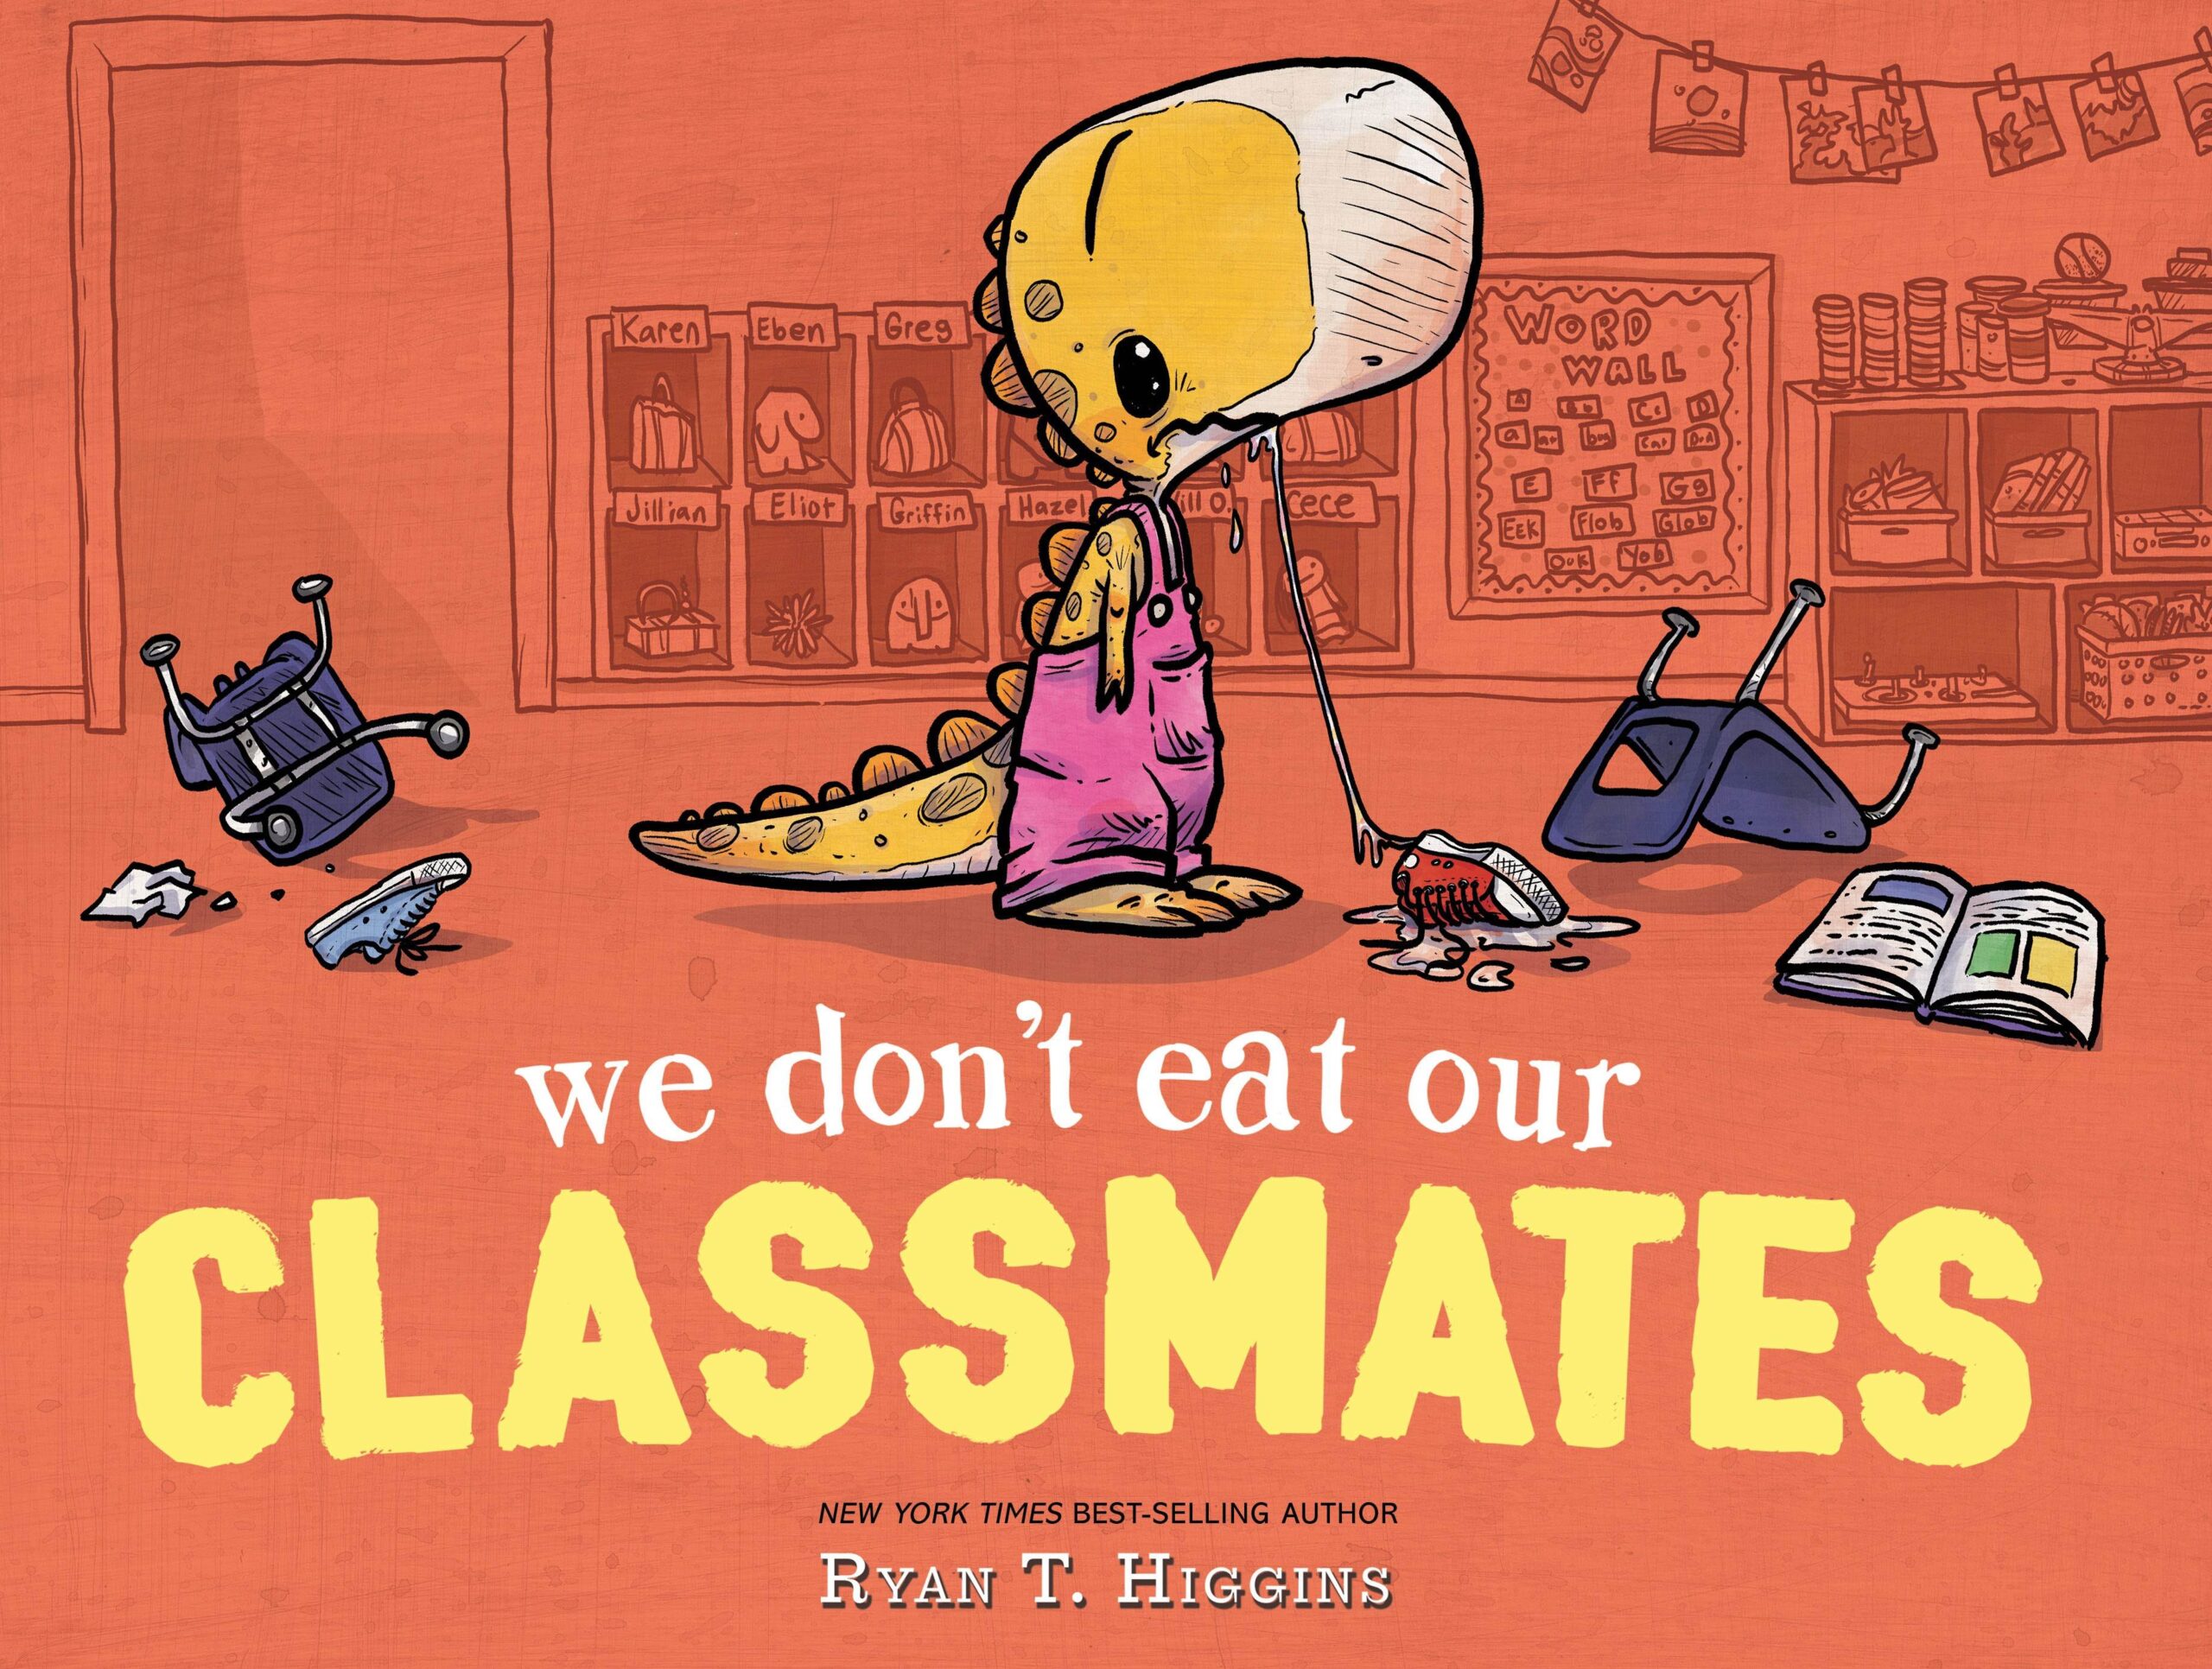 We don't eat our classmates book cover.